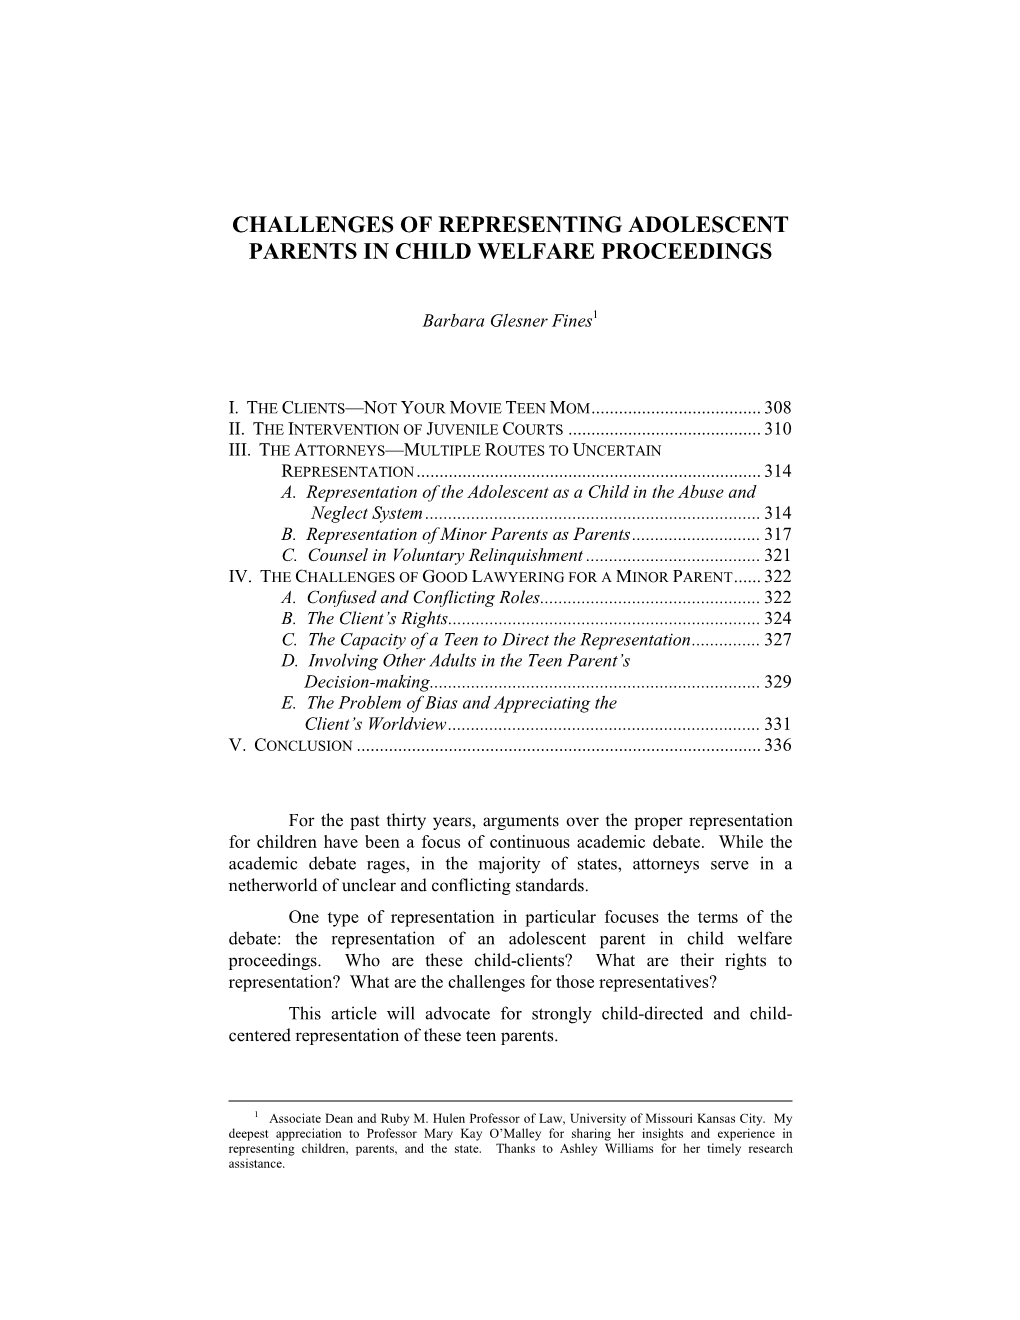 Challenges of Representing Adolescent Parents in Child Welfare Proceedings